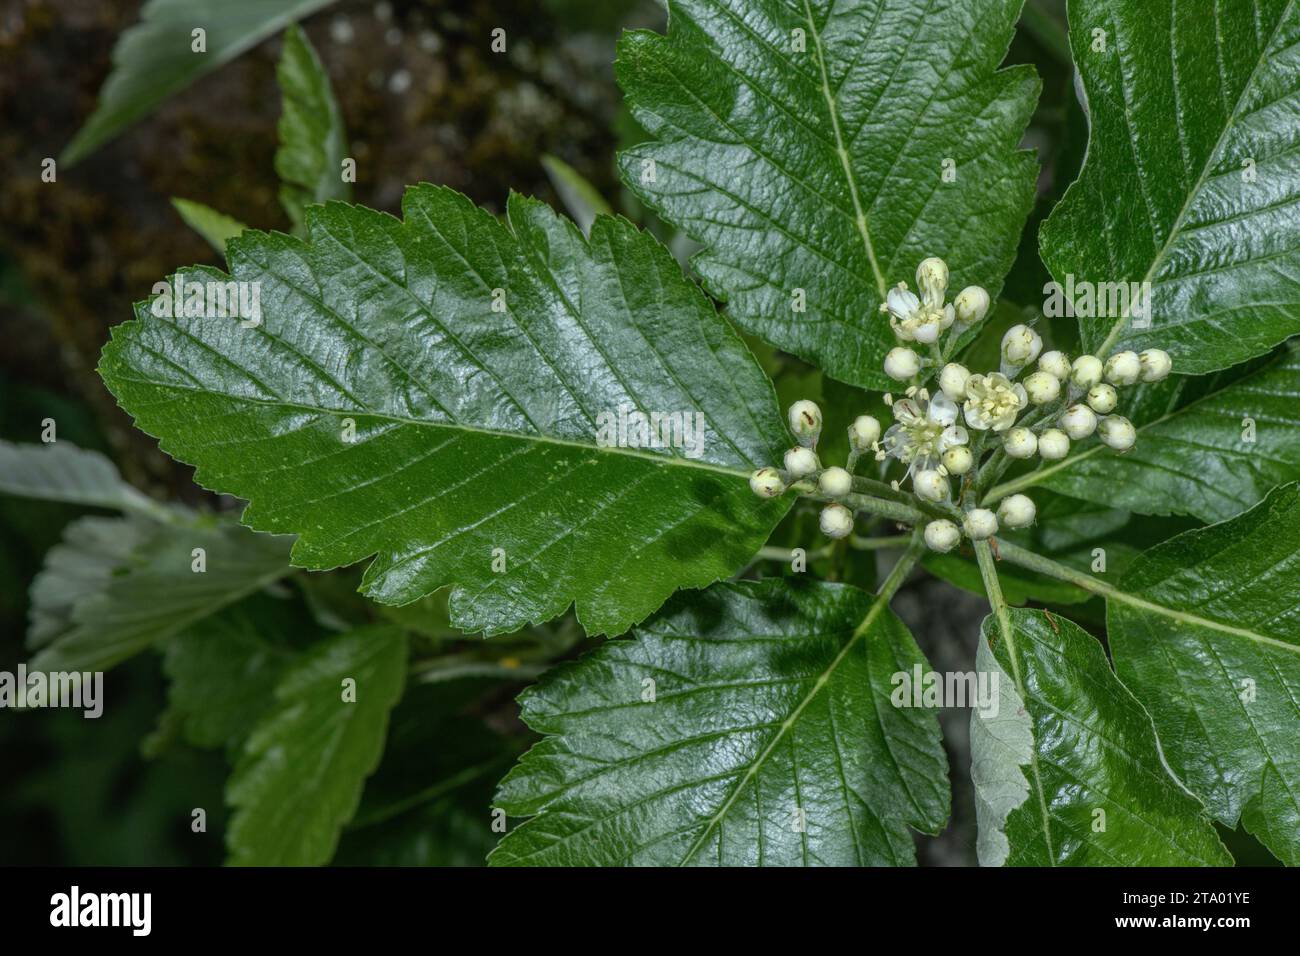 Vosges whitebeam, Sorbus mougeotii, coming into flower in spring. Jura mountains. Stock Photo